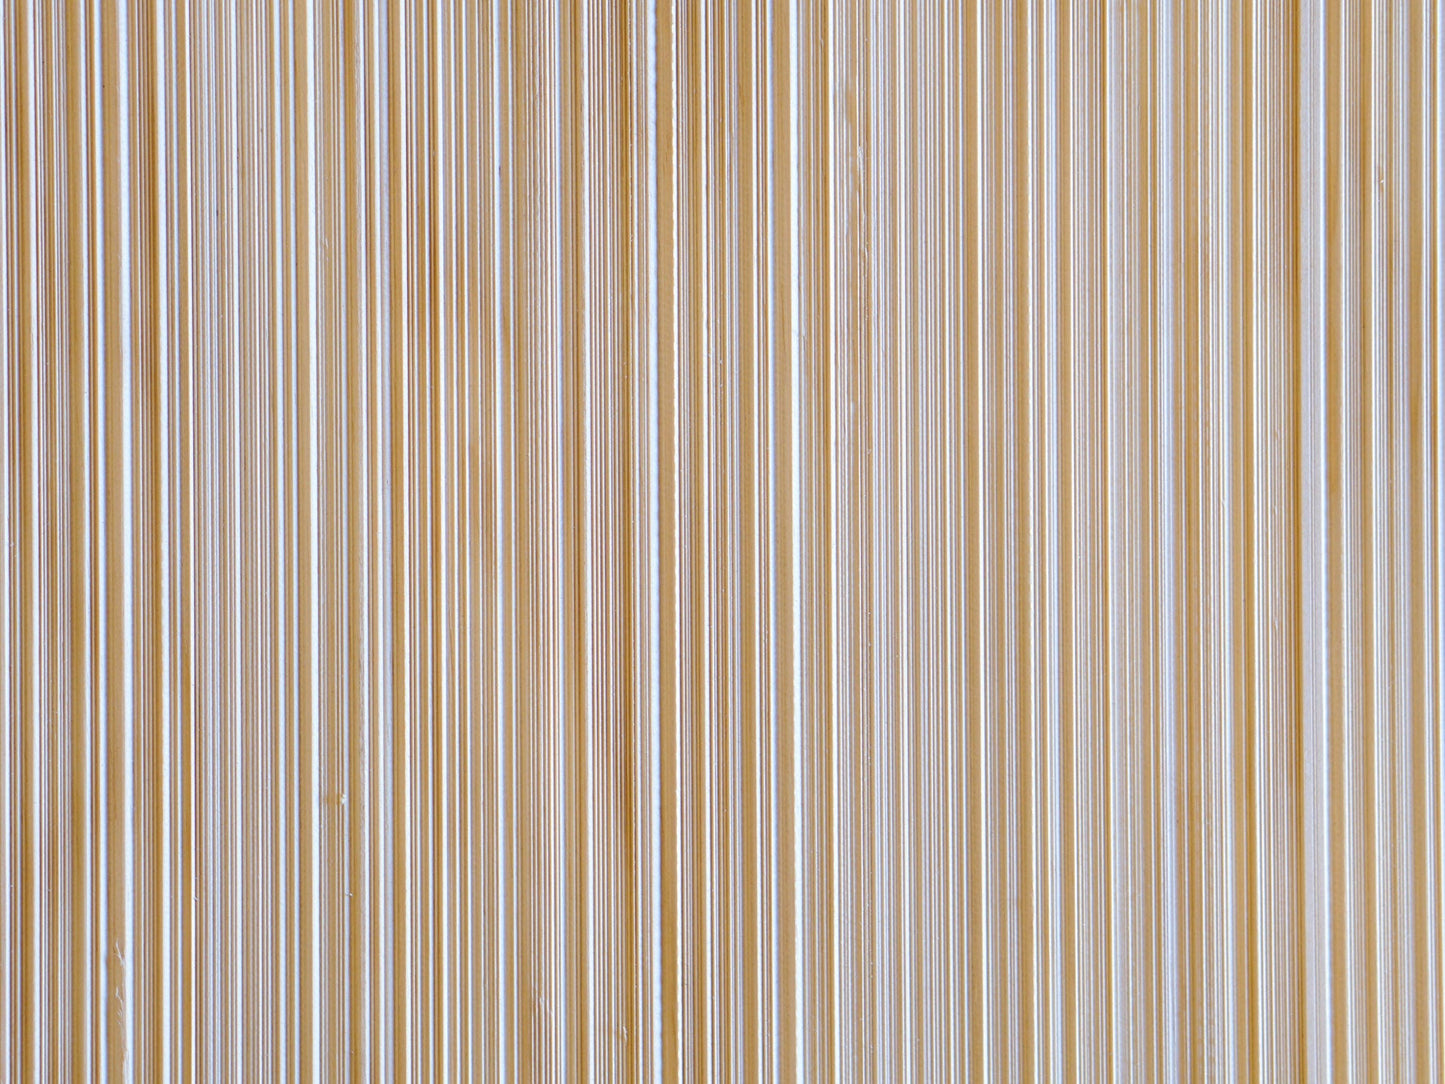 Close up of Weldtex plywood pattern consisting of a combed, striated, brushed wood appearance common in mid-century modern homes and design